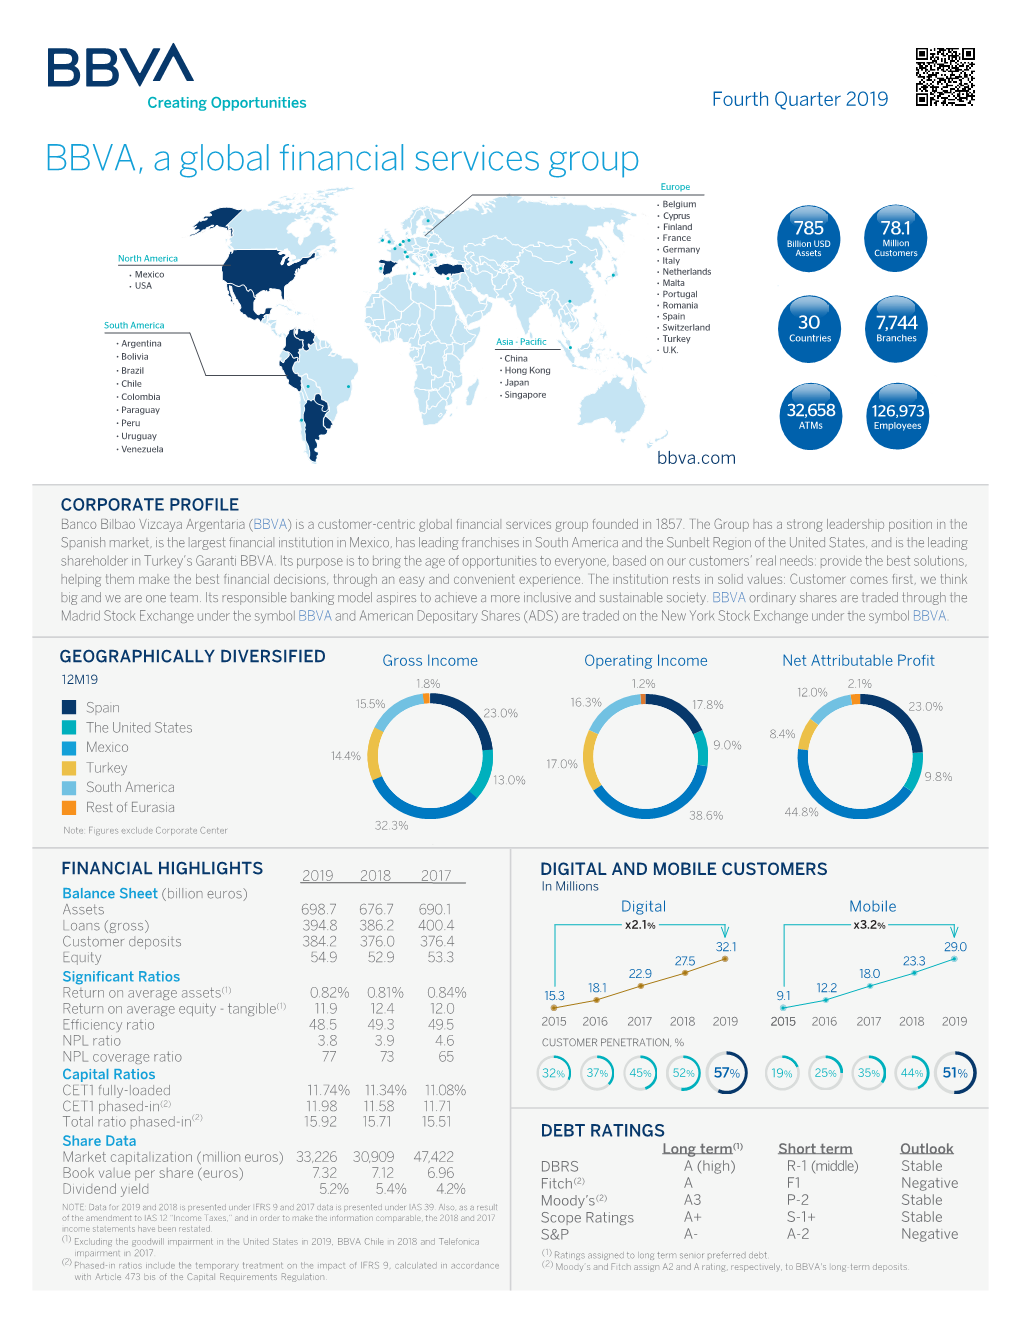 BBVA, a Global Financial Services Group